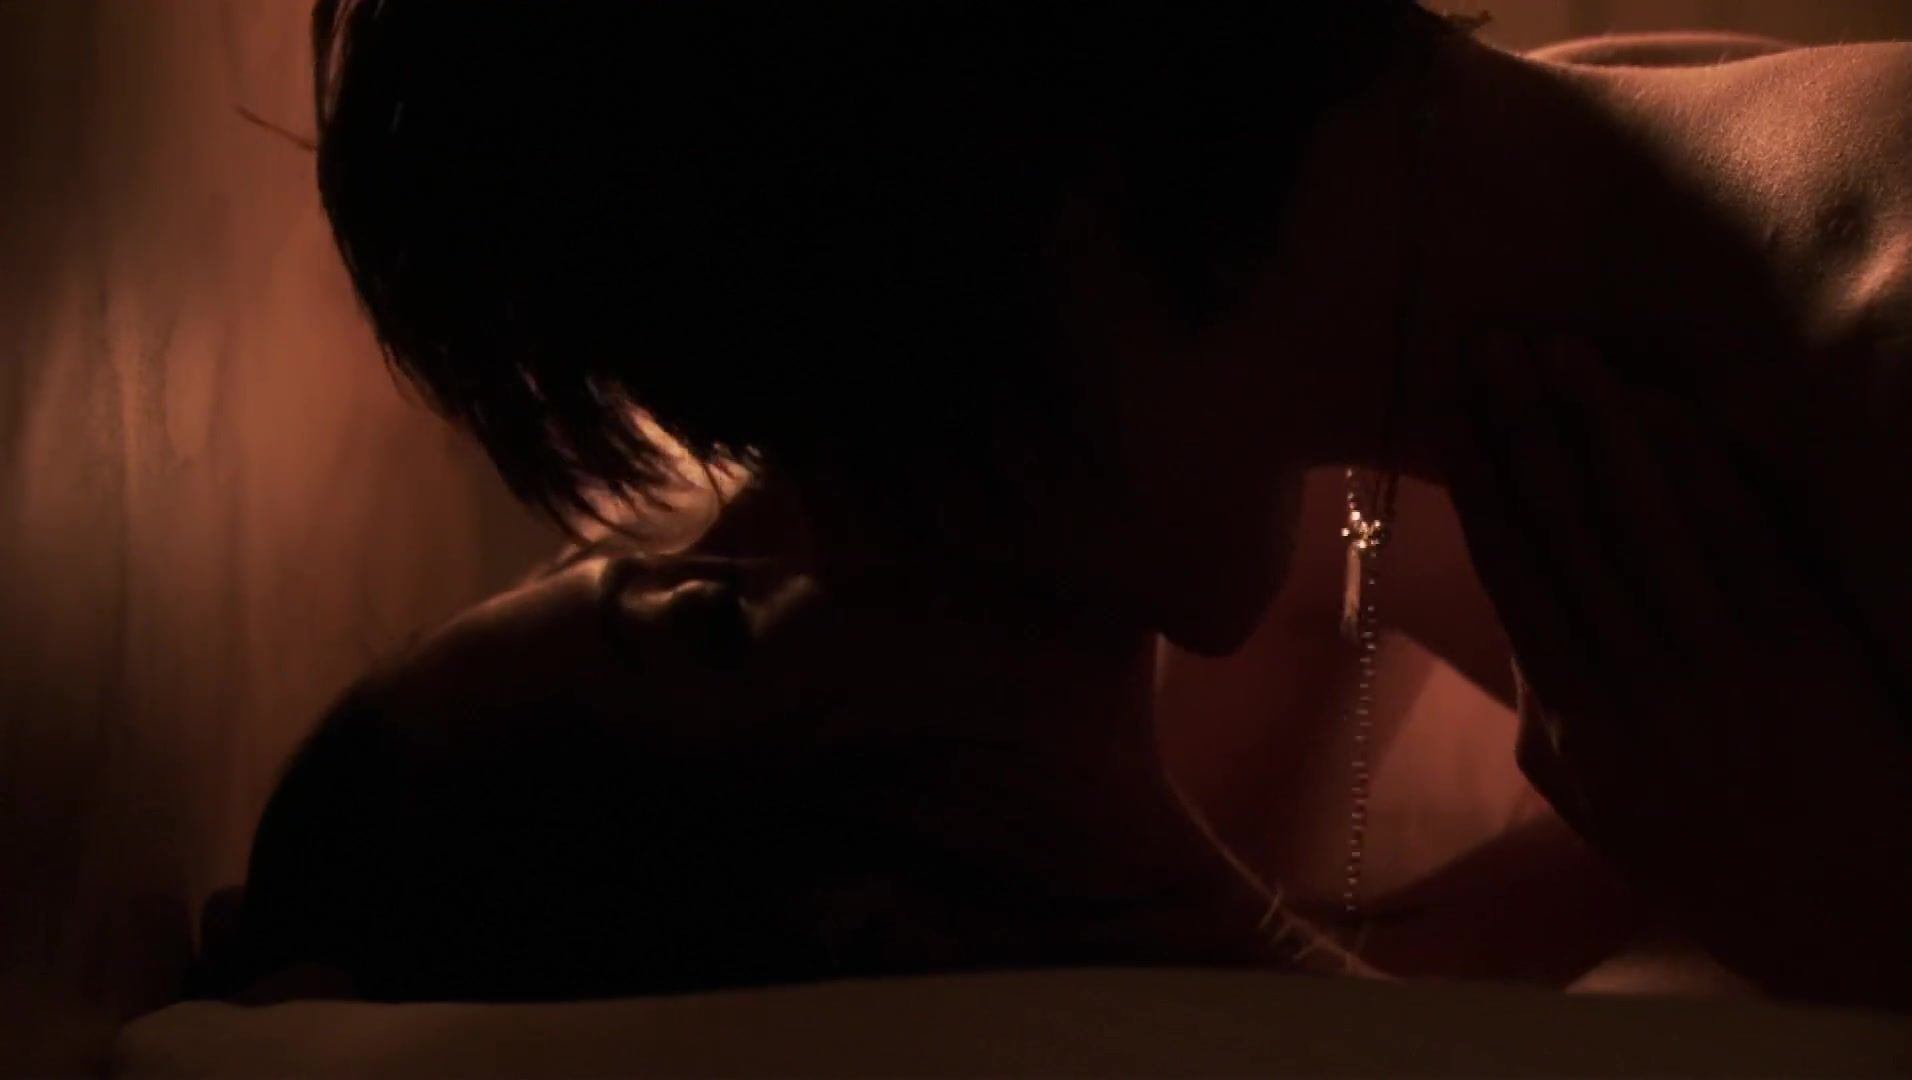 PornHubLive Celebs video of Sarah Shahi and Katherine Moennig licking snatches in The L Word LoveHoney - 1